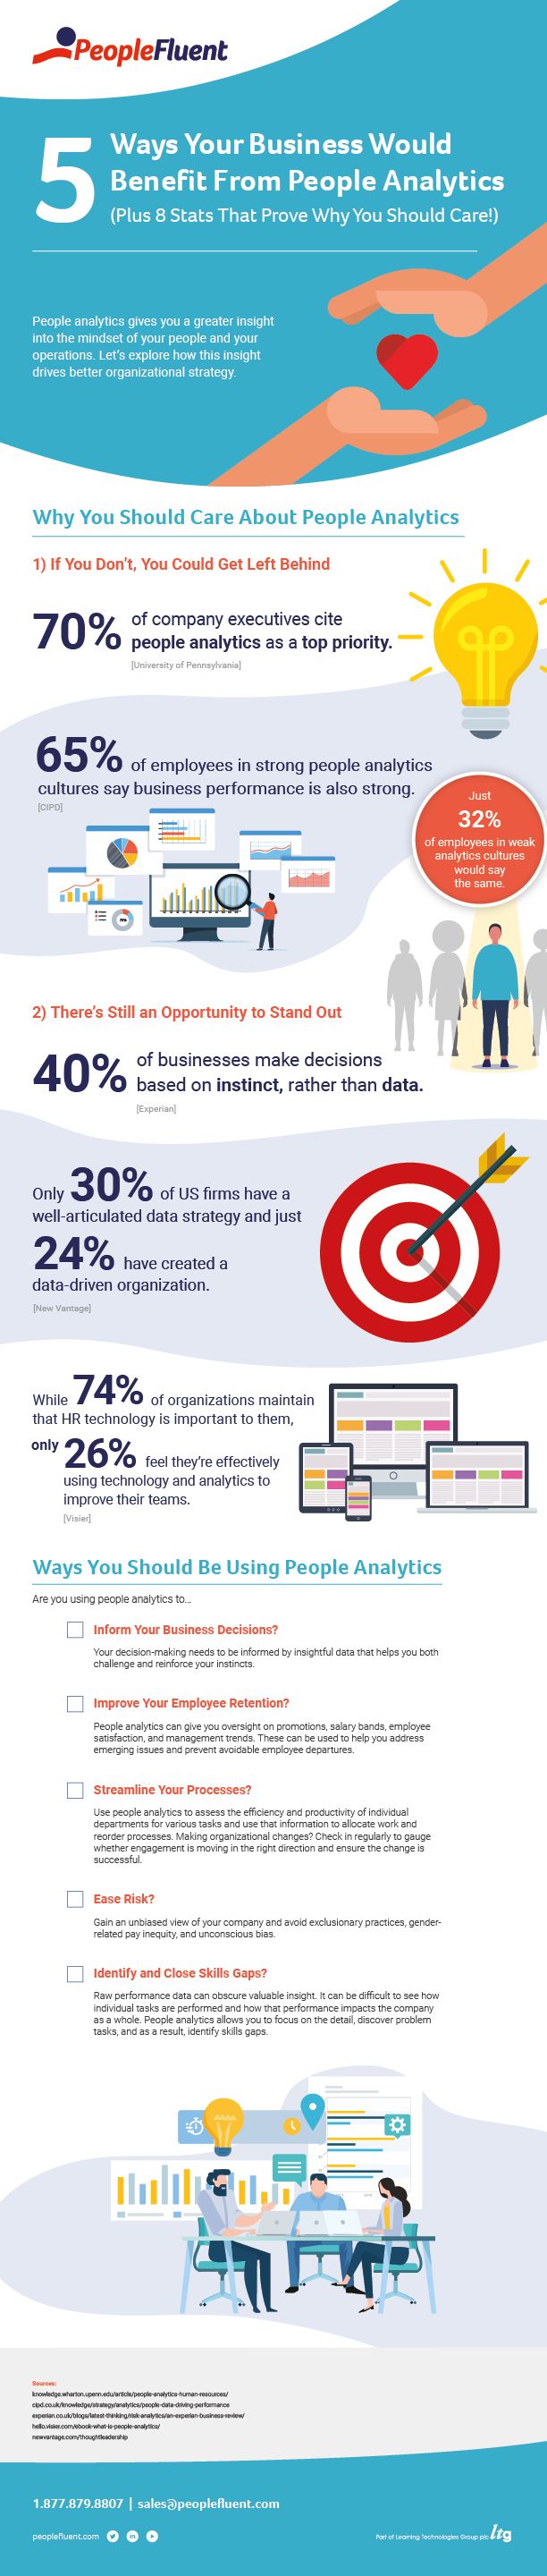 A copy of the PeopleFluent infographic, "5 Ways Your Business Would Benefit From People Analytics"